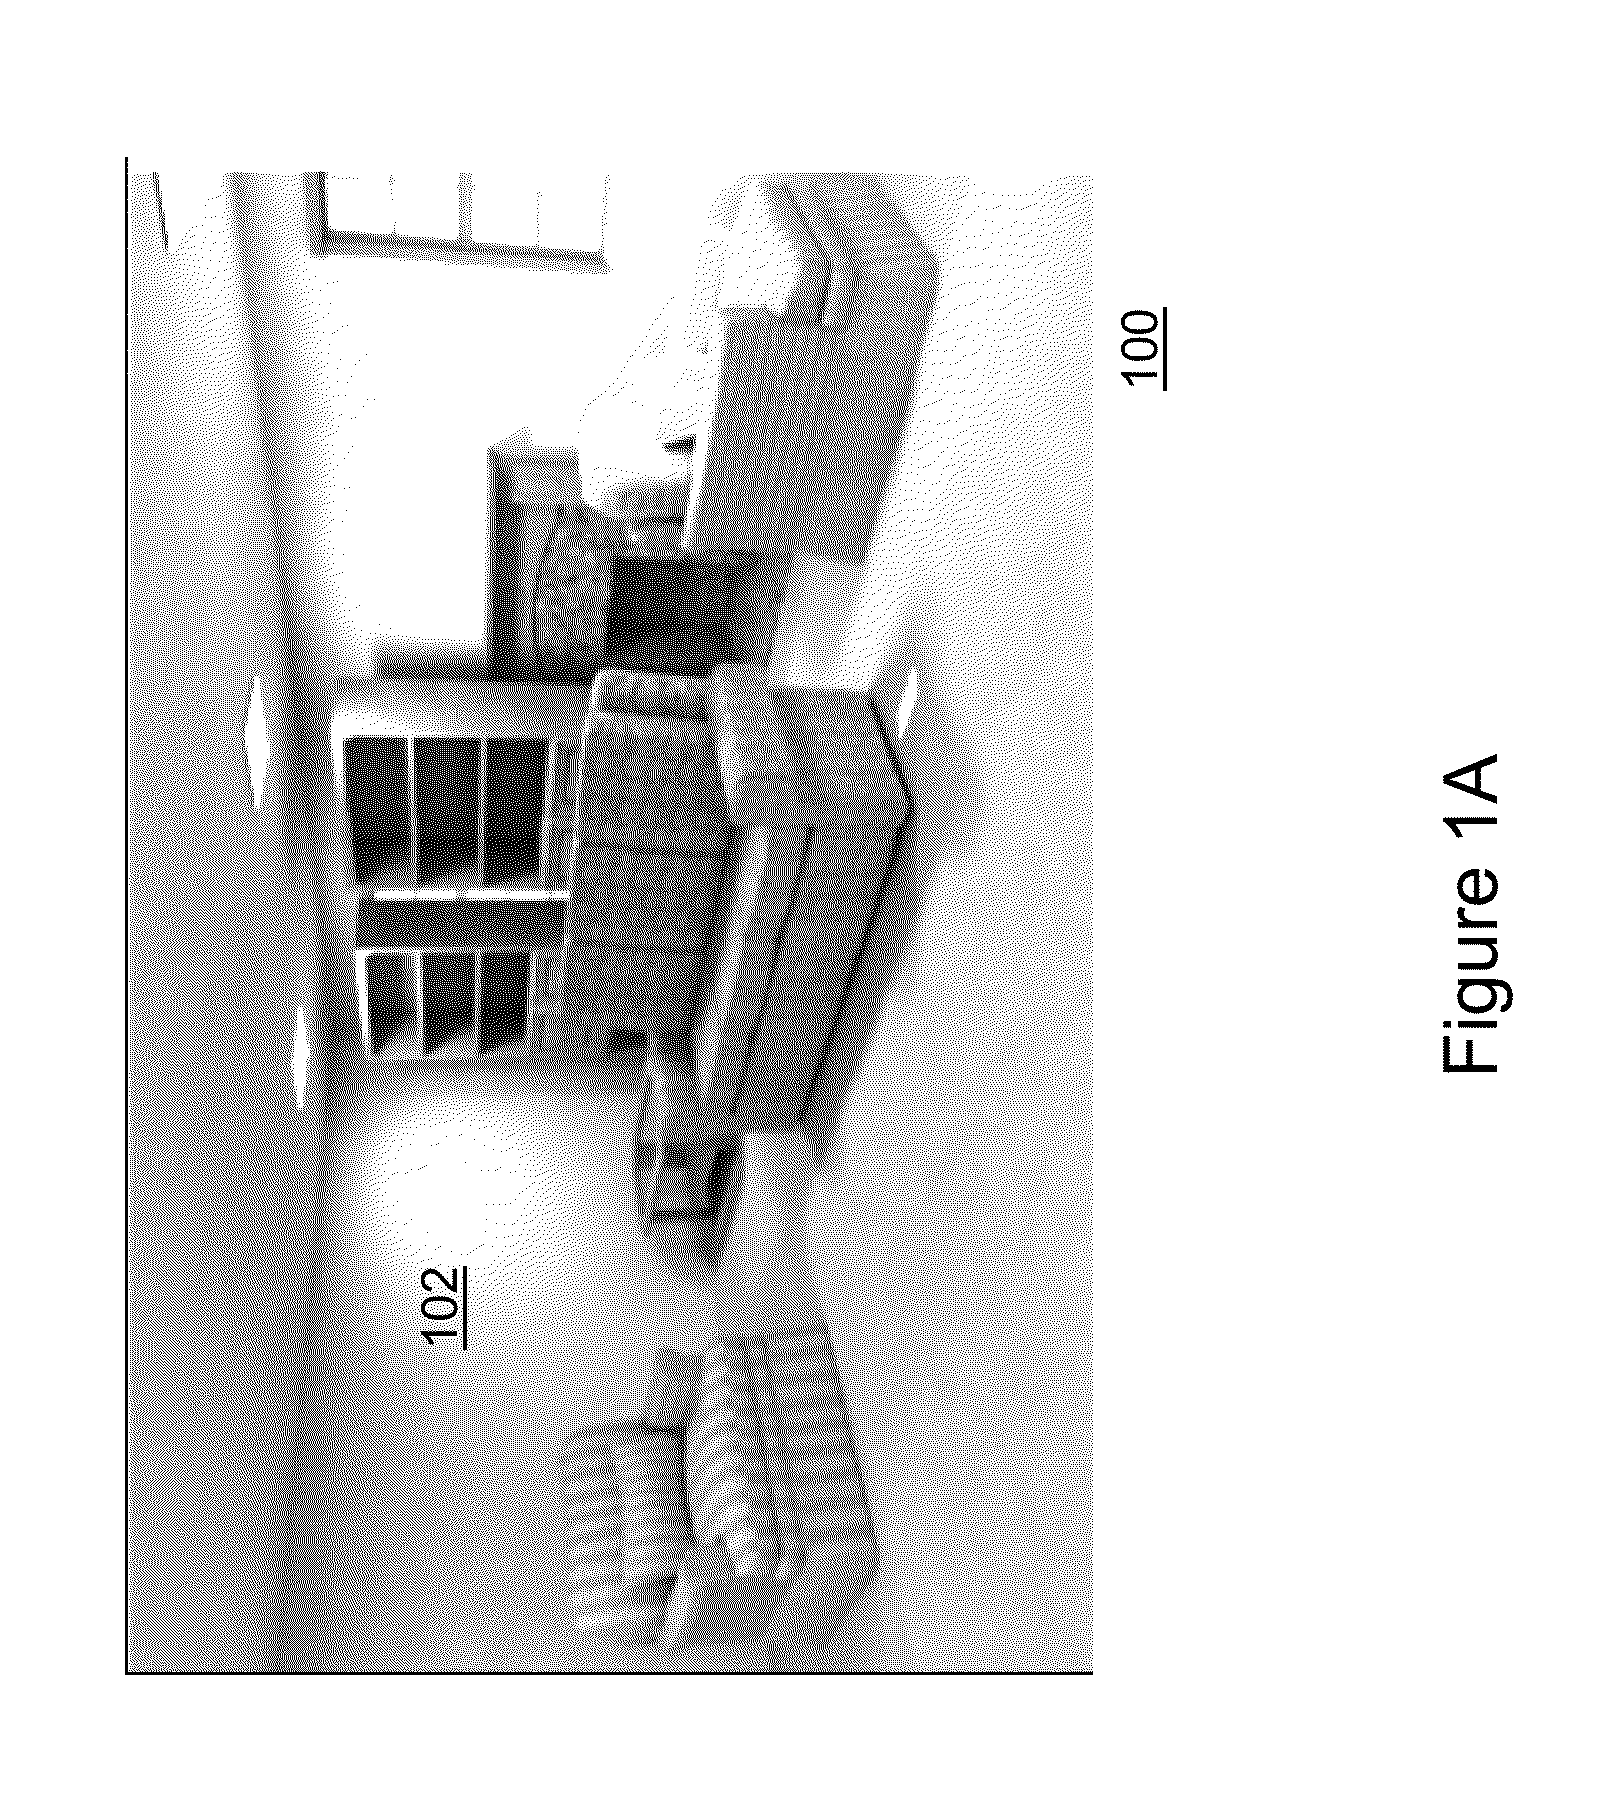 Method and System for Interactive Layout